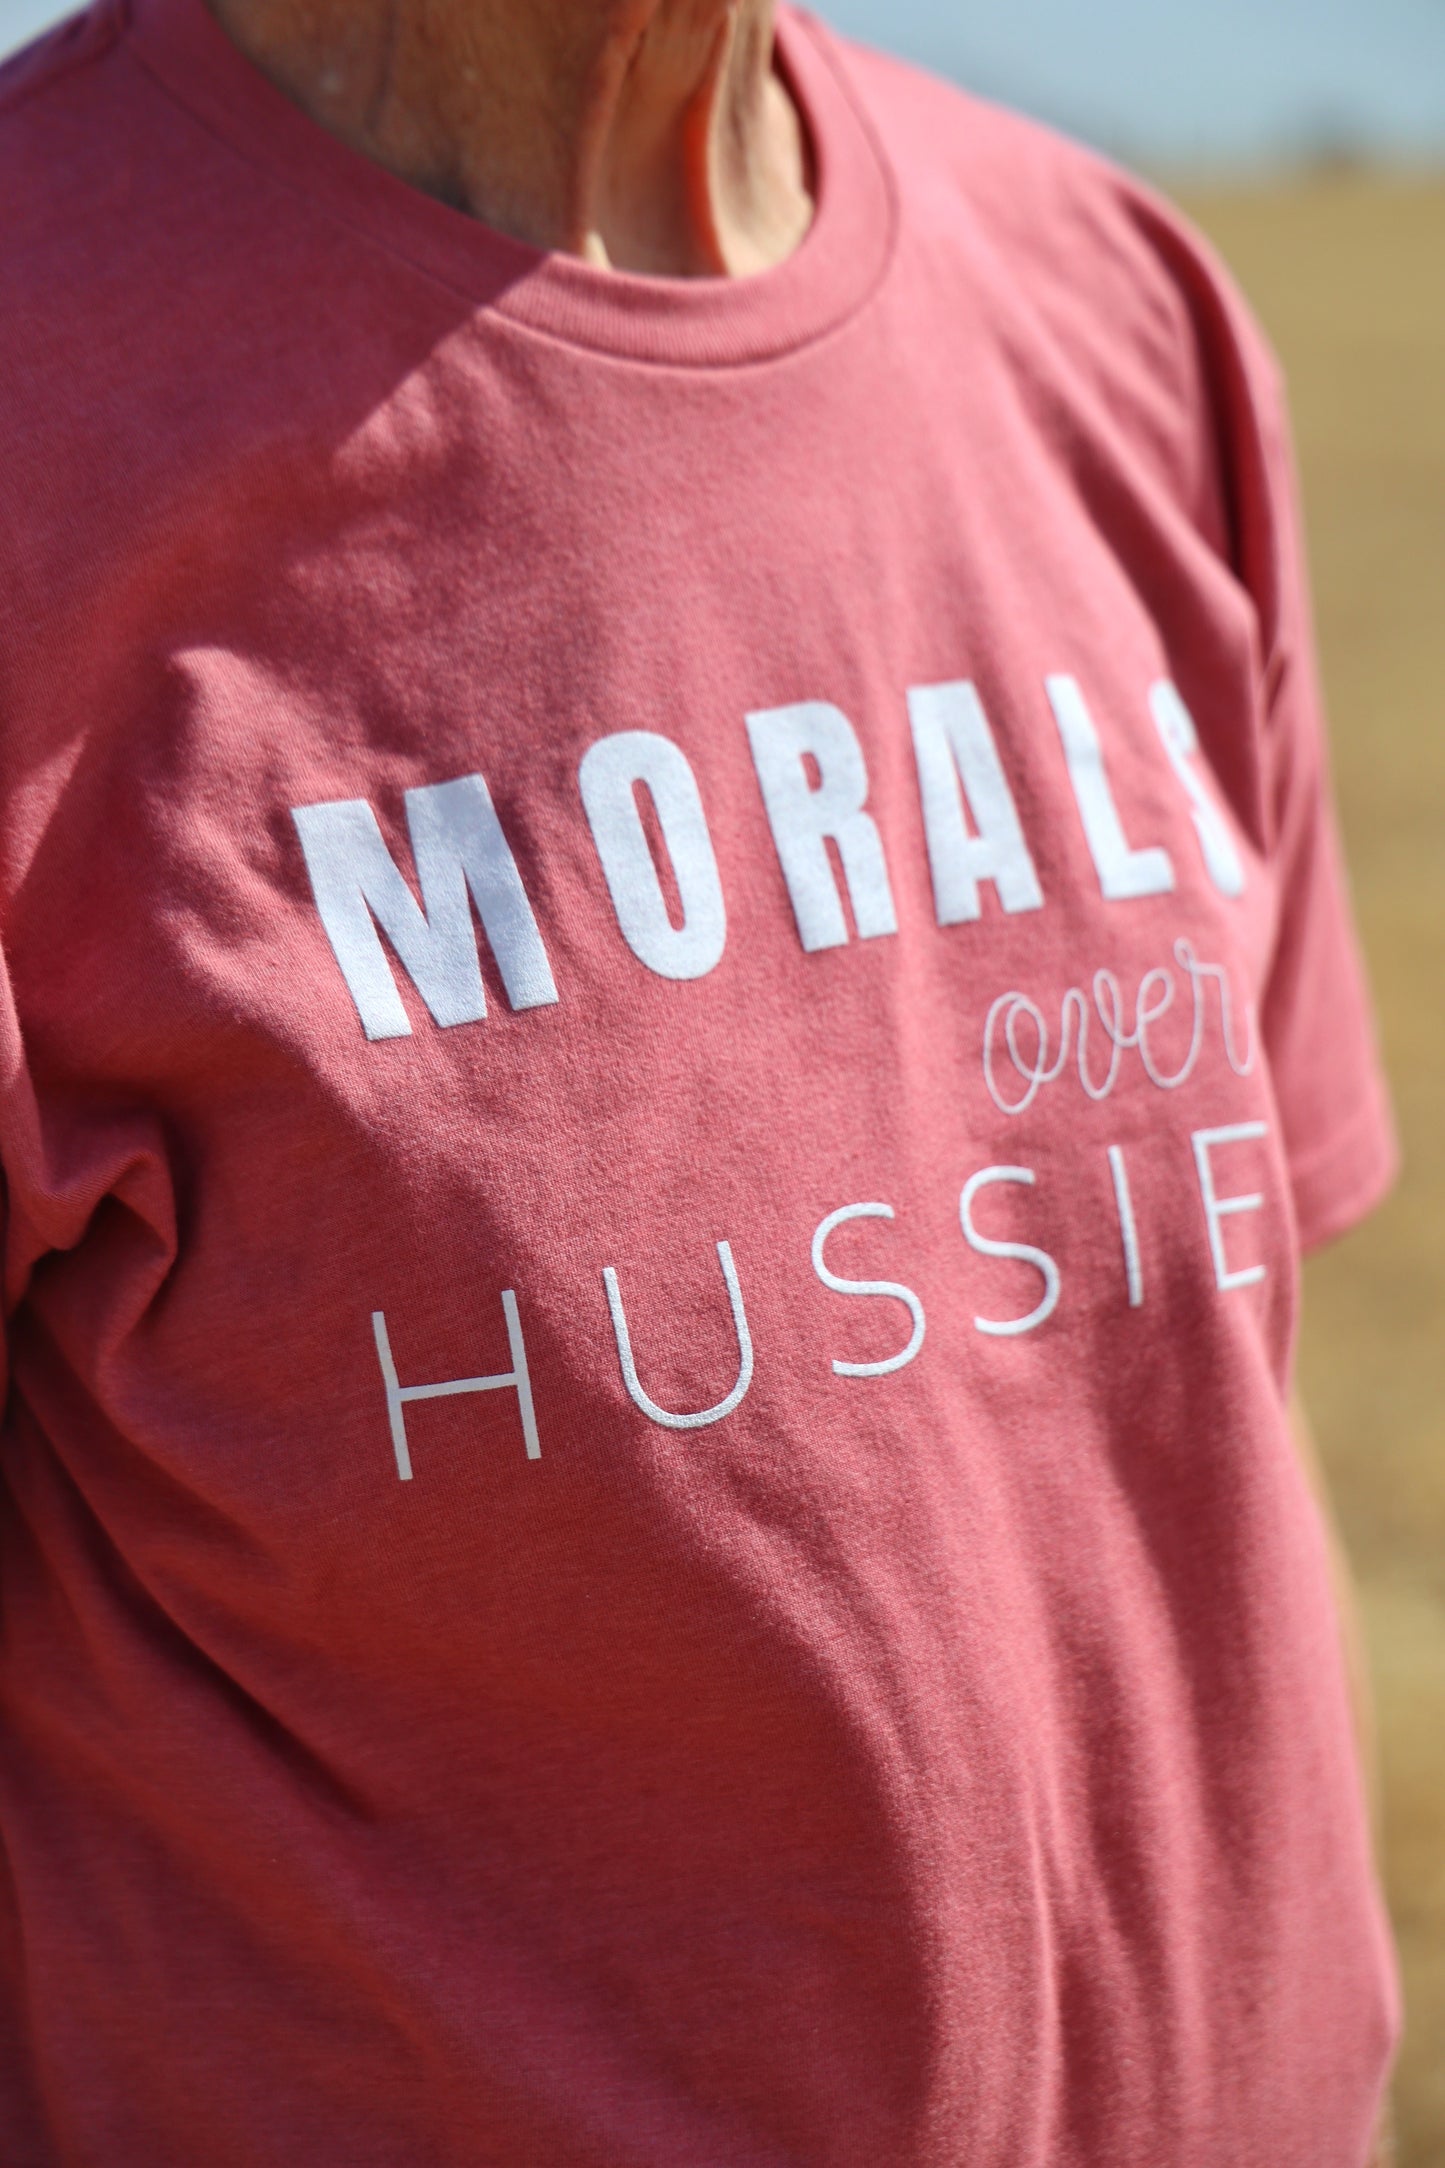 
                  
                    MORALS OVER HUSSIES TEE
                  
                